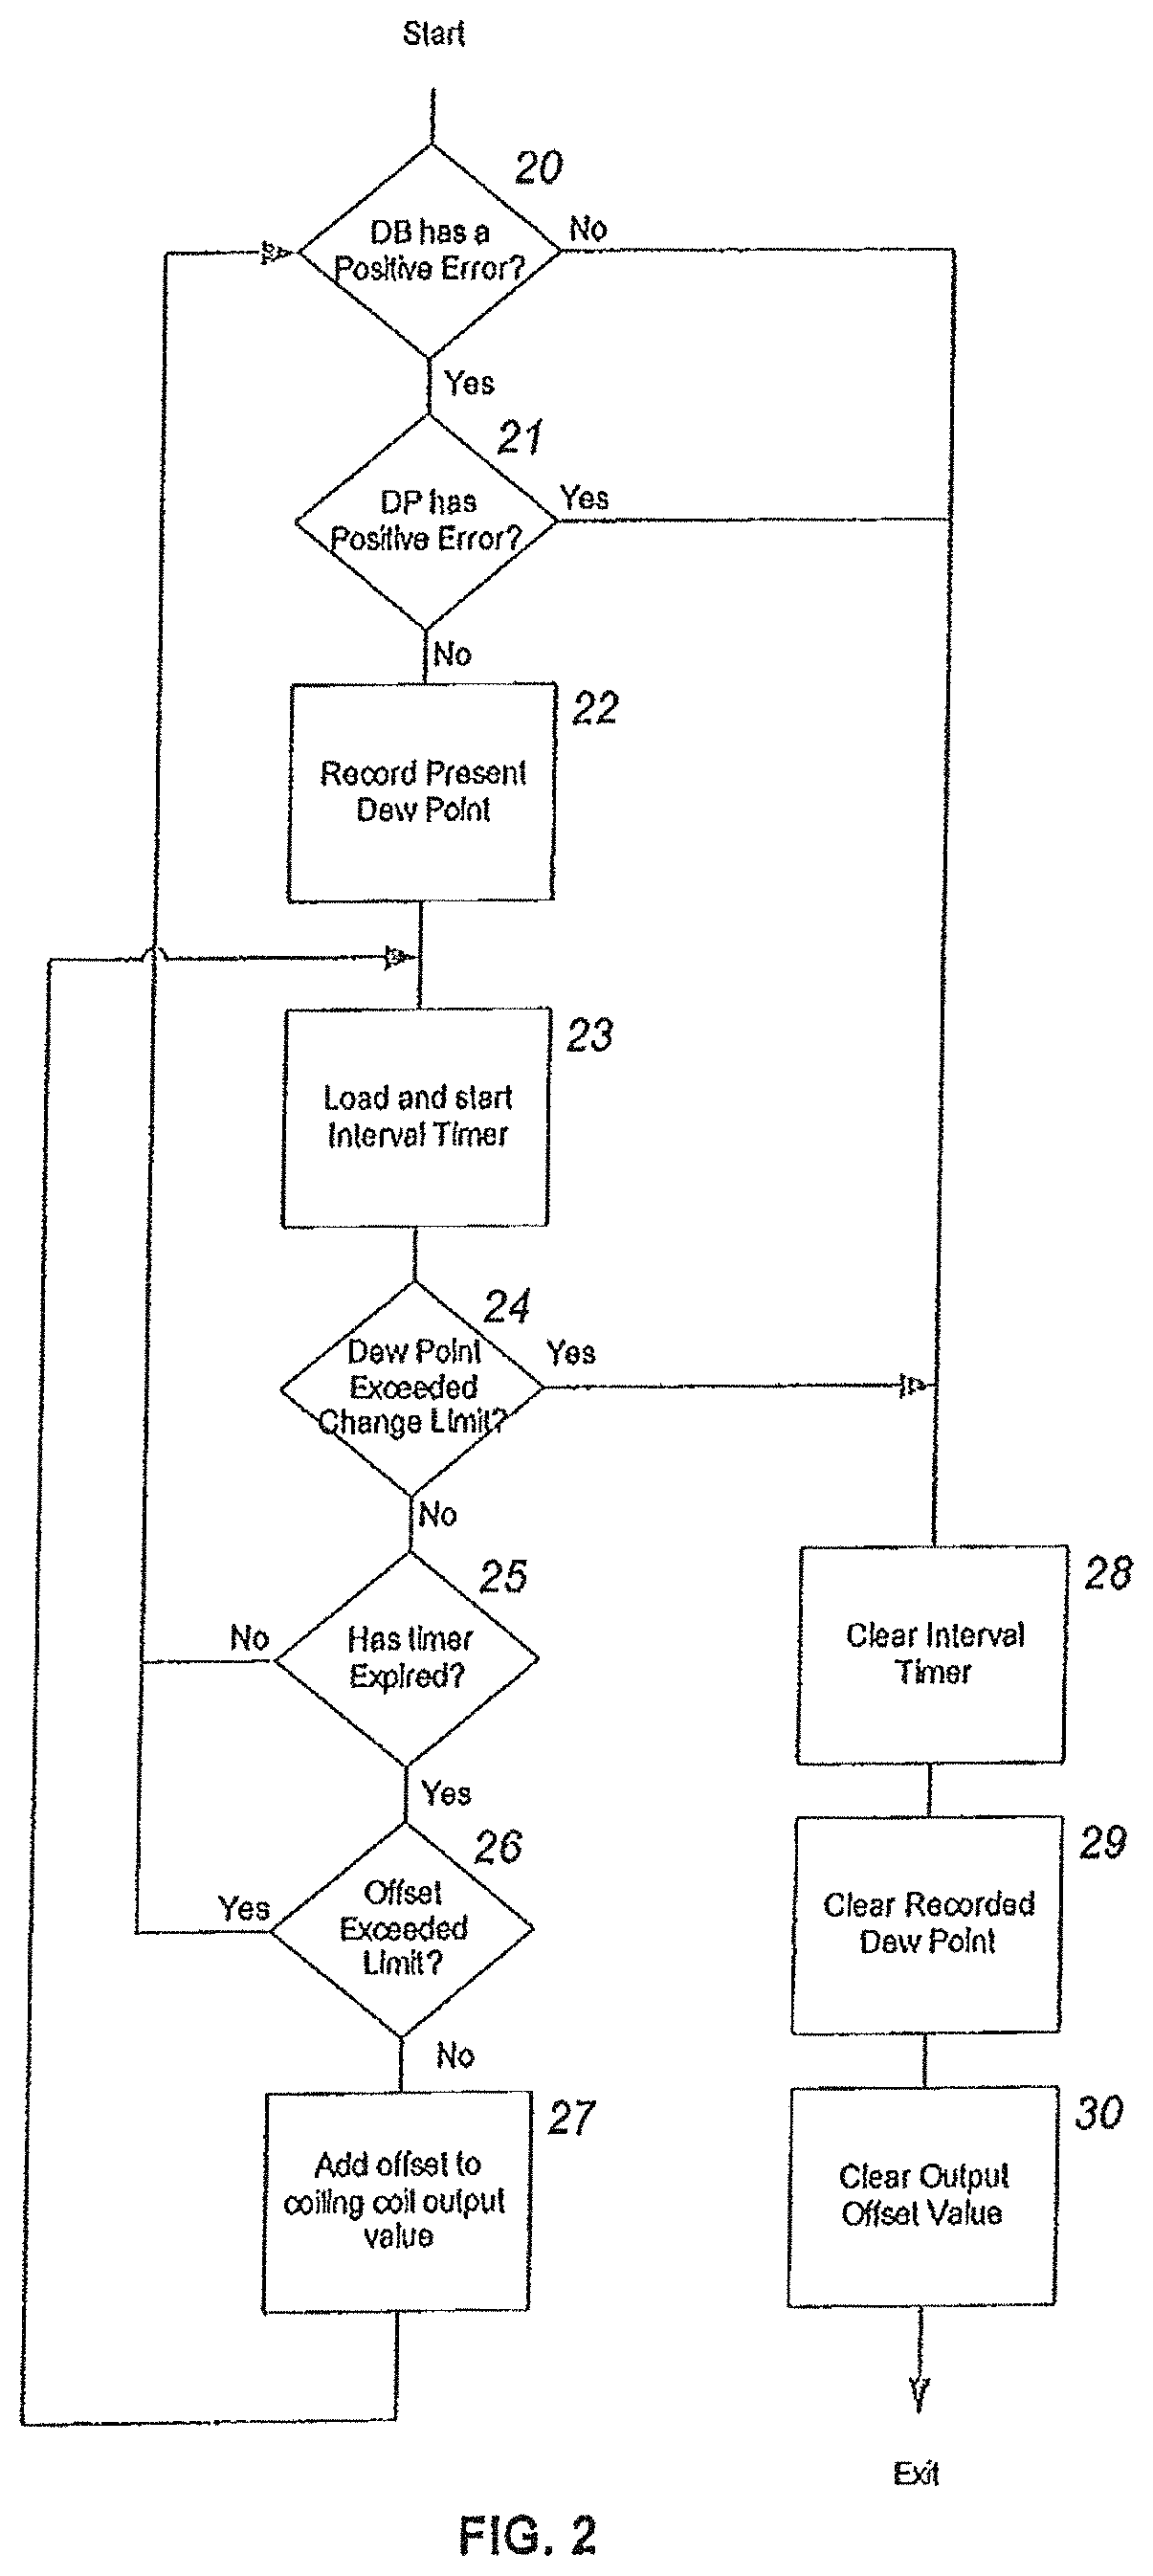 Vapor pressure control system for drying and curing products